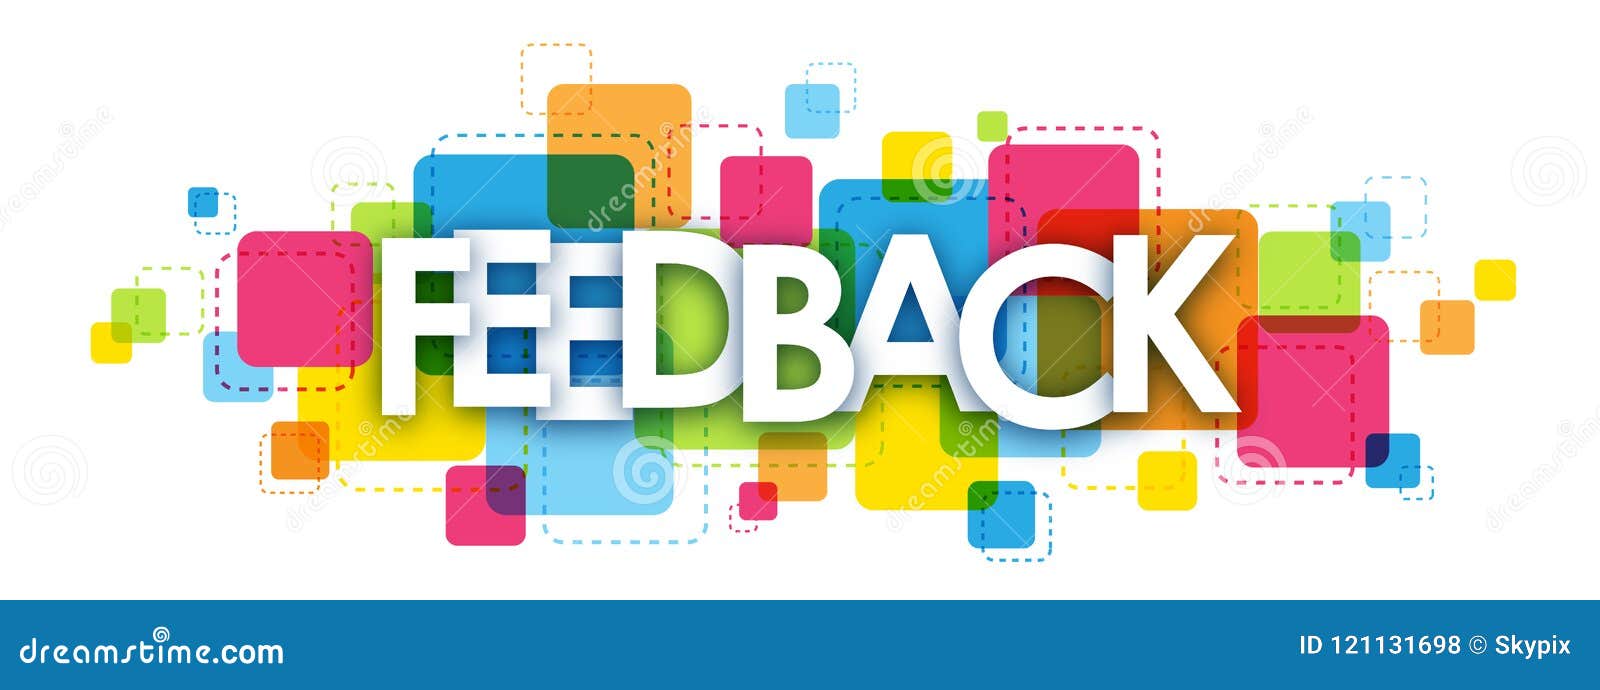 FEEDBACK Banner on Colorful Squares Background Stock Illustration -  Illustration of excellent, quality: 121131698